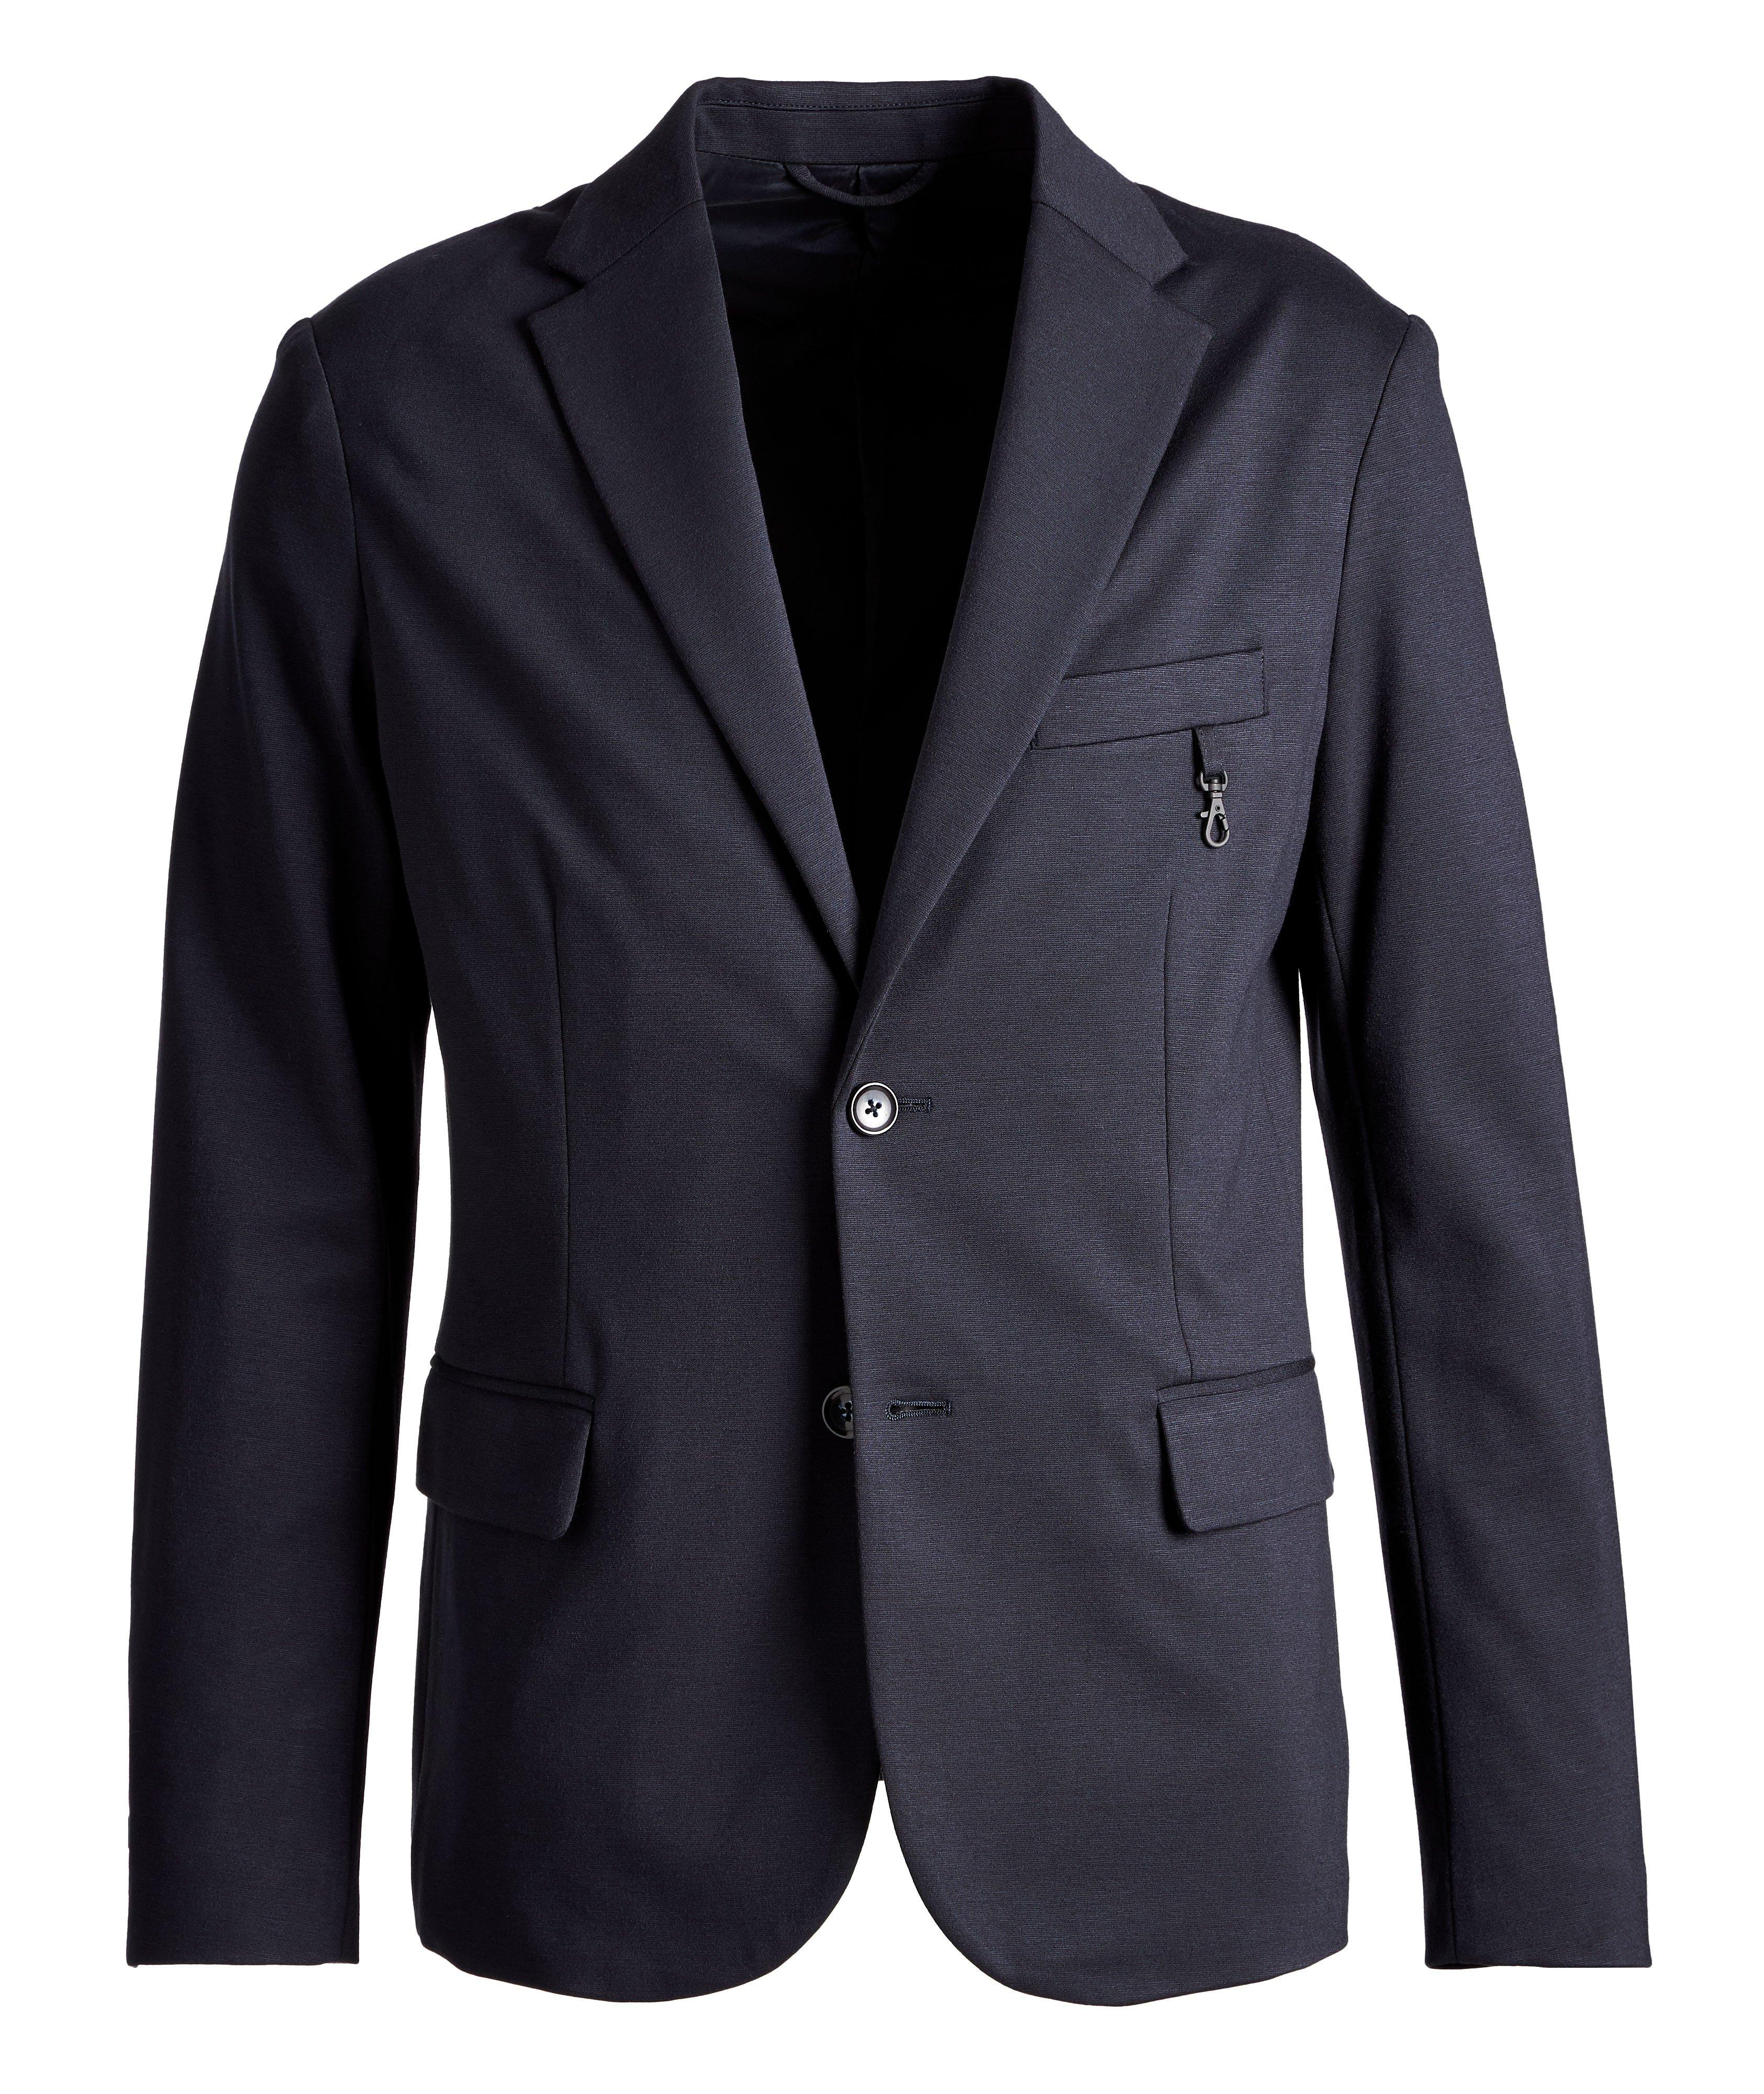 Travel Essential Unstructured Sports Jacket image 0